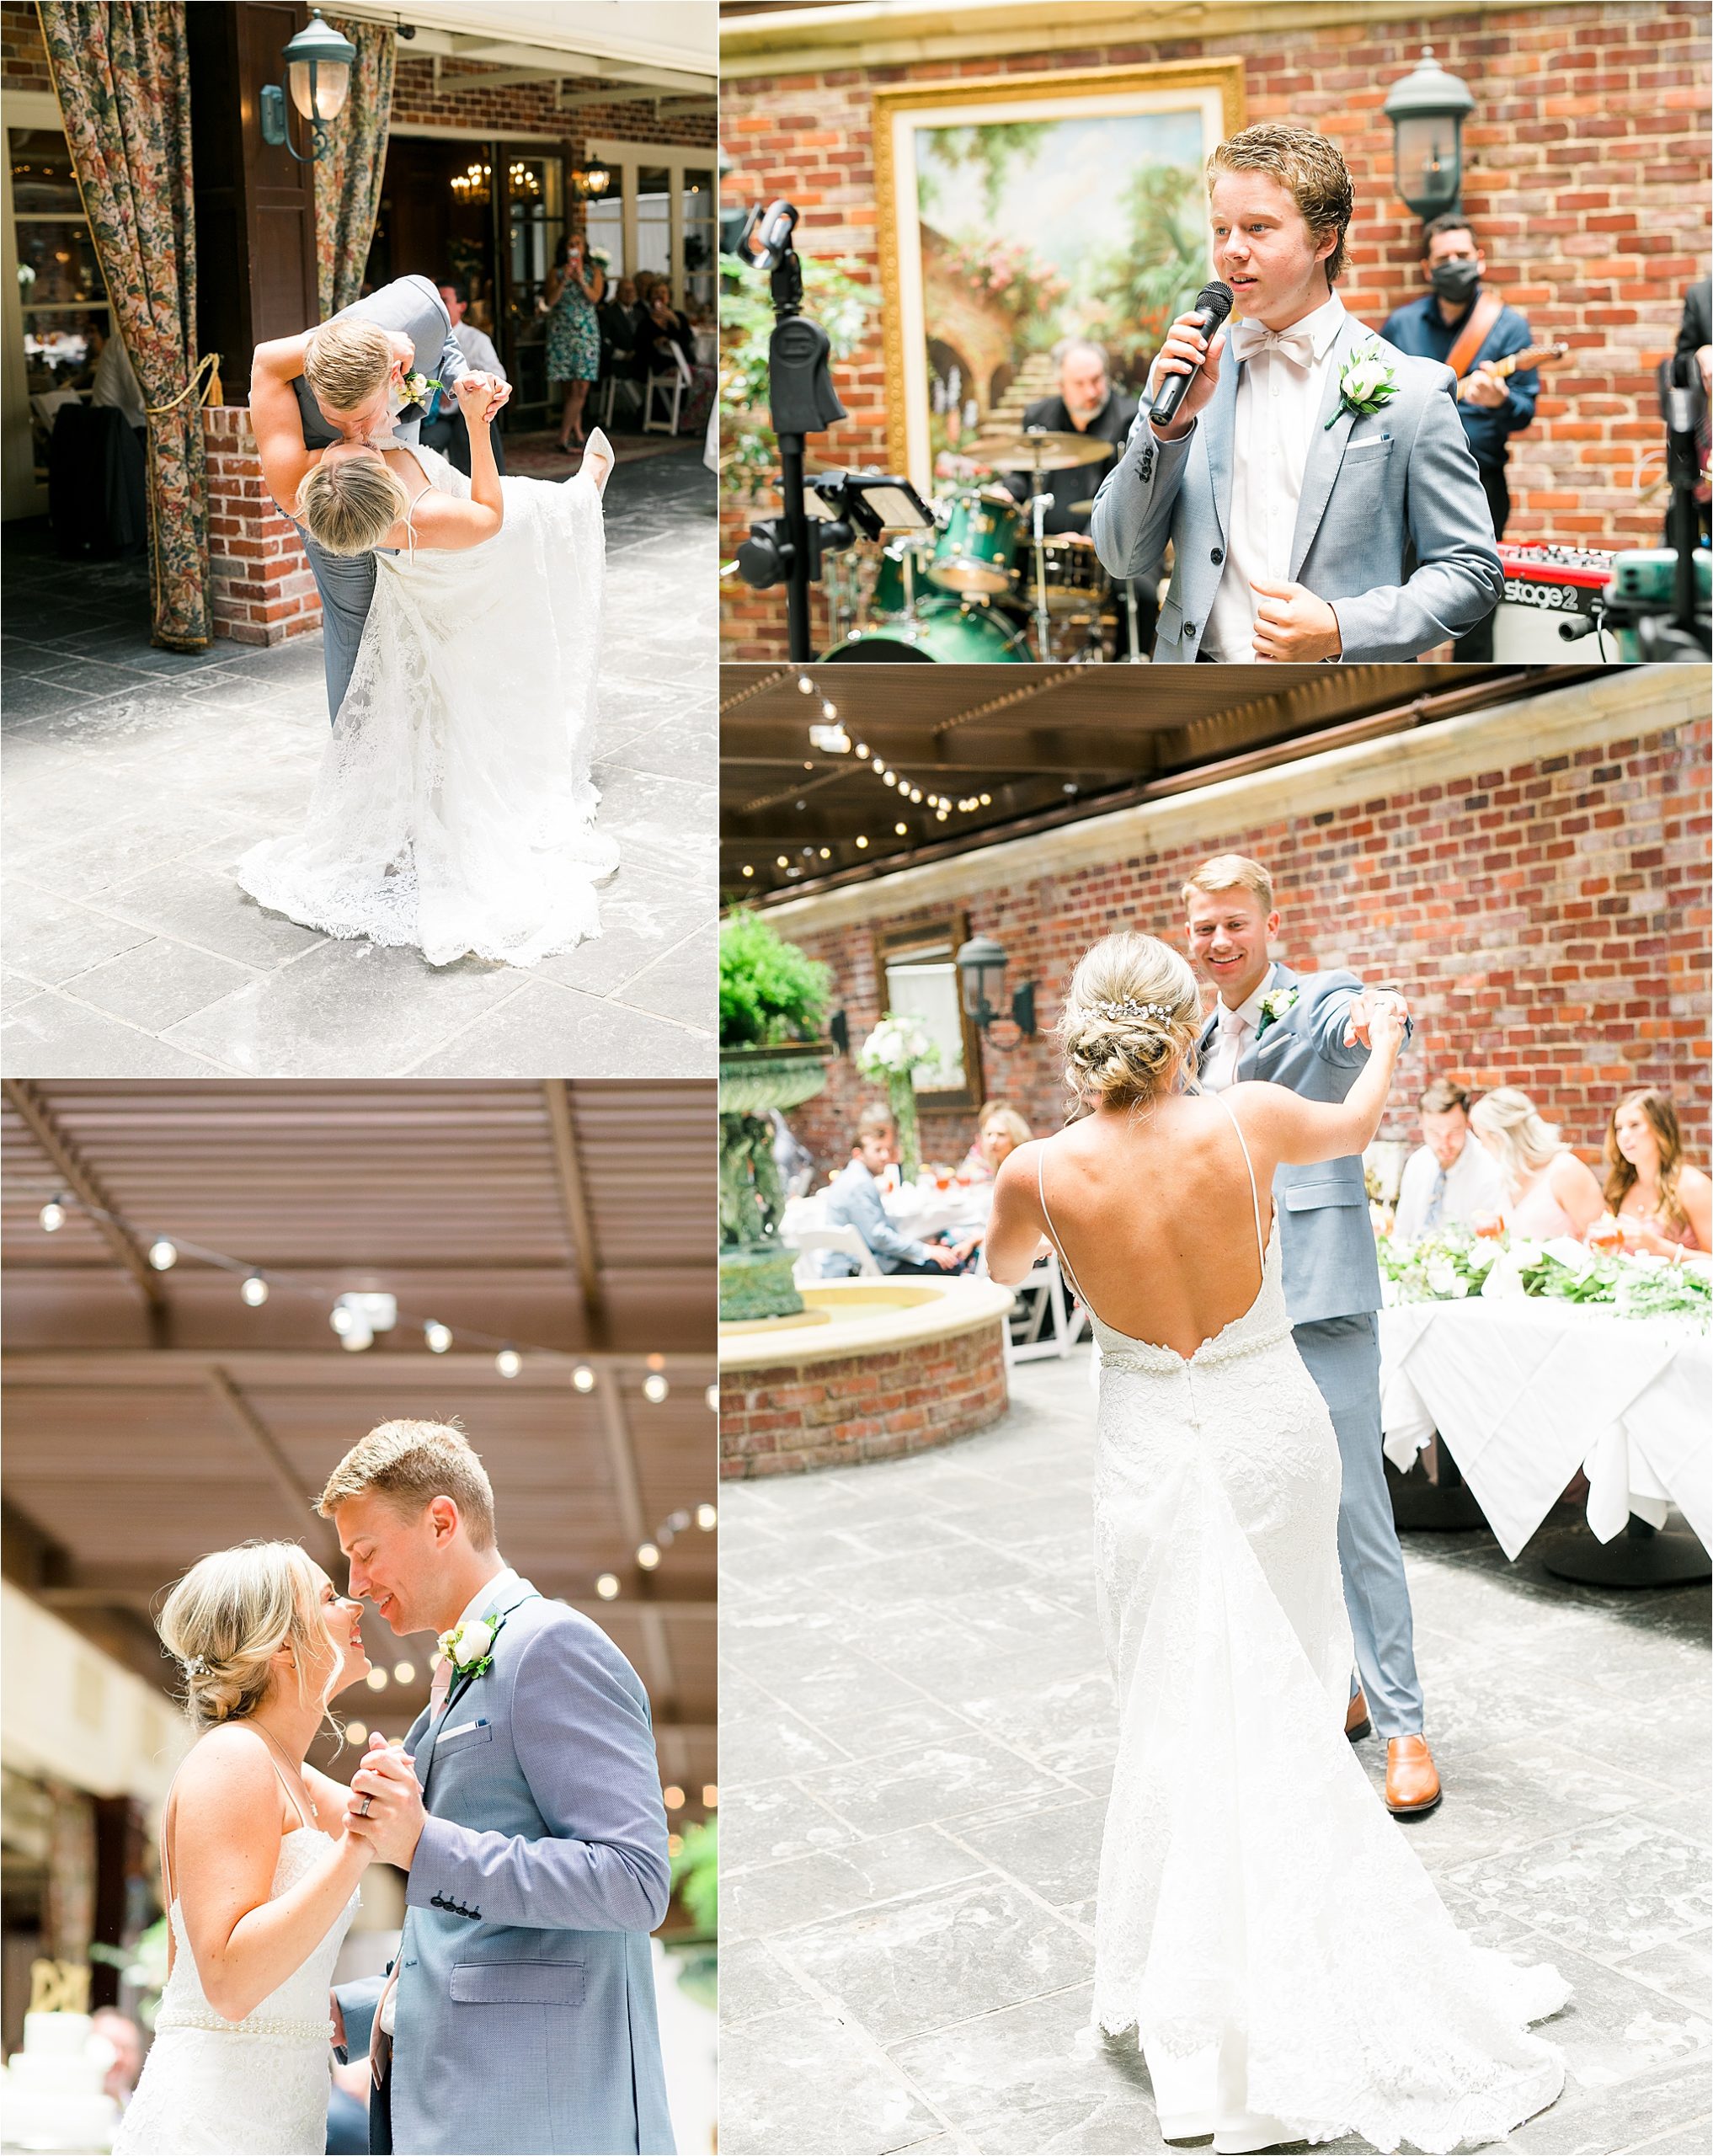 A newly married couple shares their first dance as husband and wife while a groomsman sings at their garden reception at III Forks Dallas 